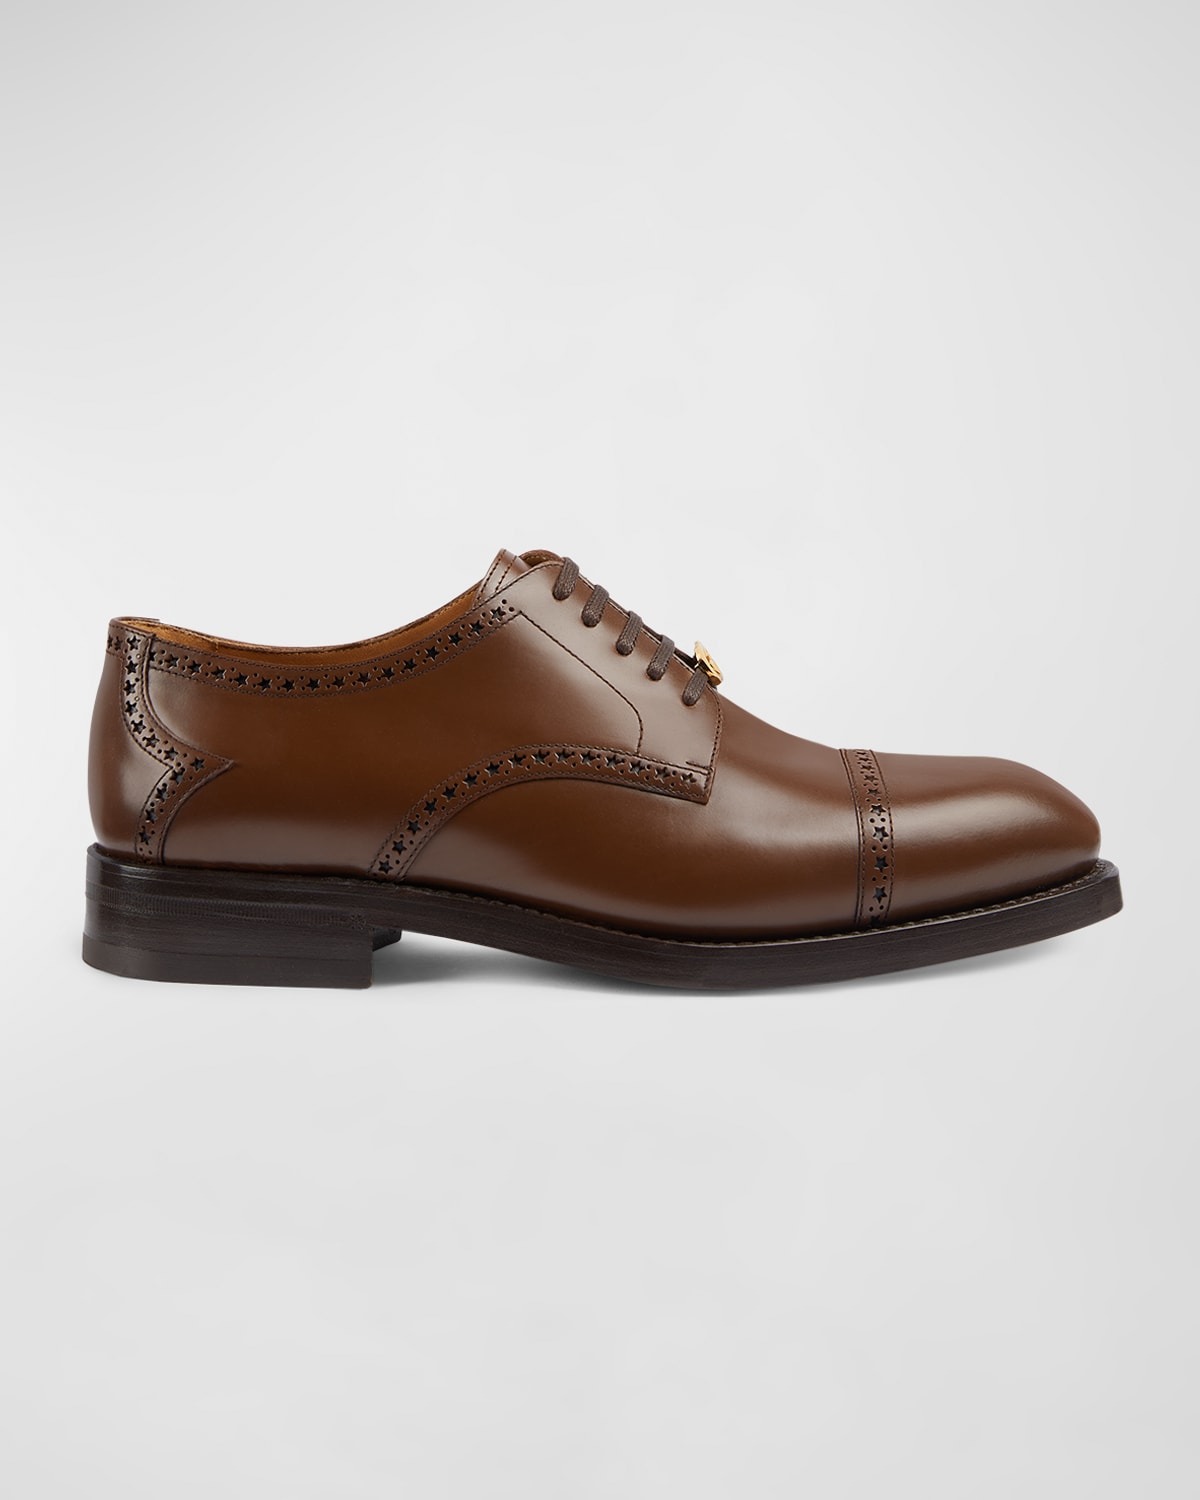 Gucci Men's Rooster Brogue Leather Derby Shoes